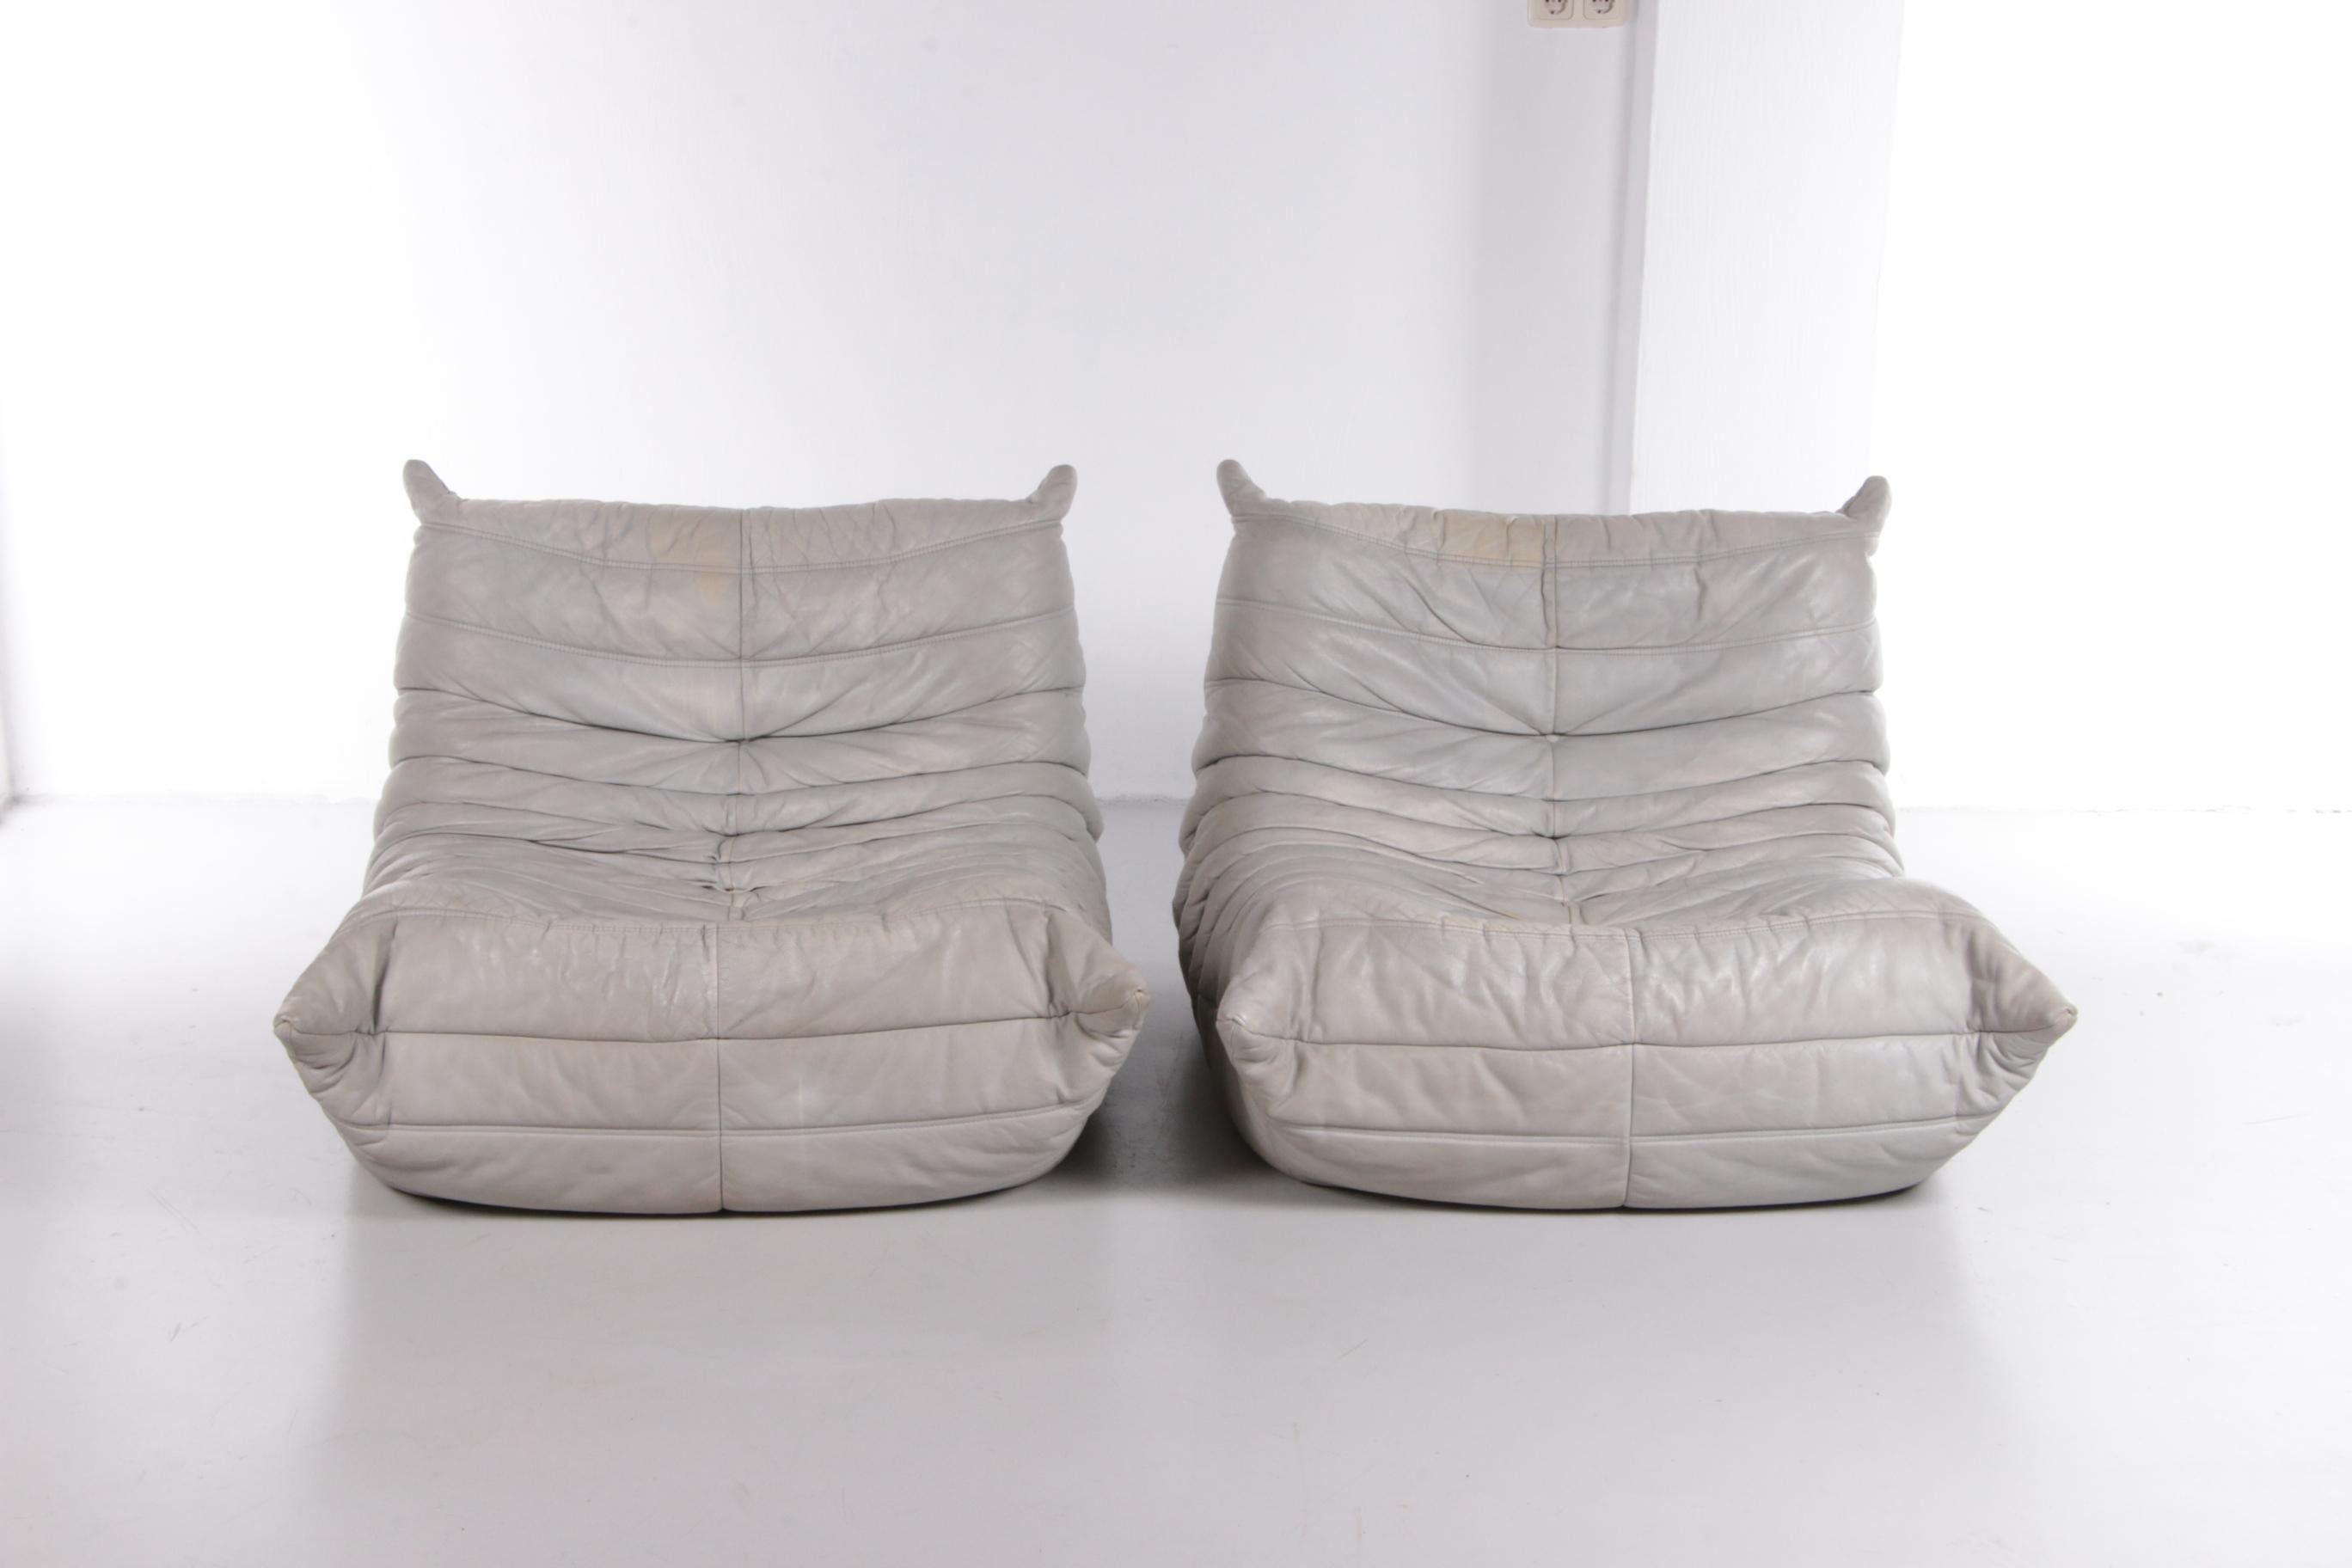 This iconic relax Togo by ligne Roset, a design by Michel Ducaroy is never out of fashion! The comfortable design classic from Ligne Roset is highly sought after and will look great in any interior.

The set was made around the 1970s. It is made